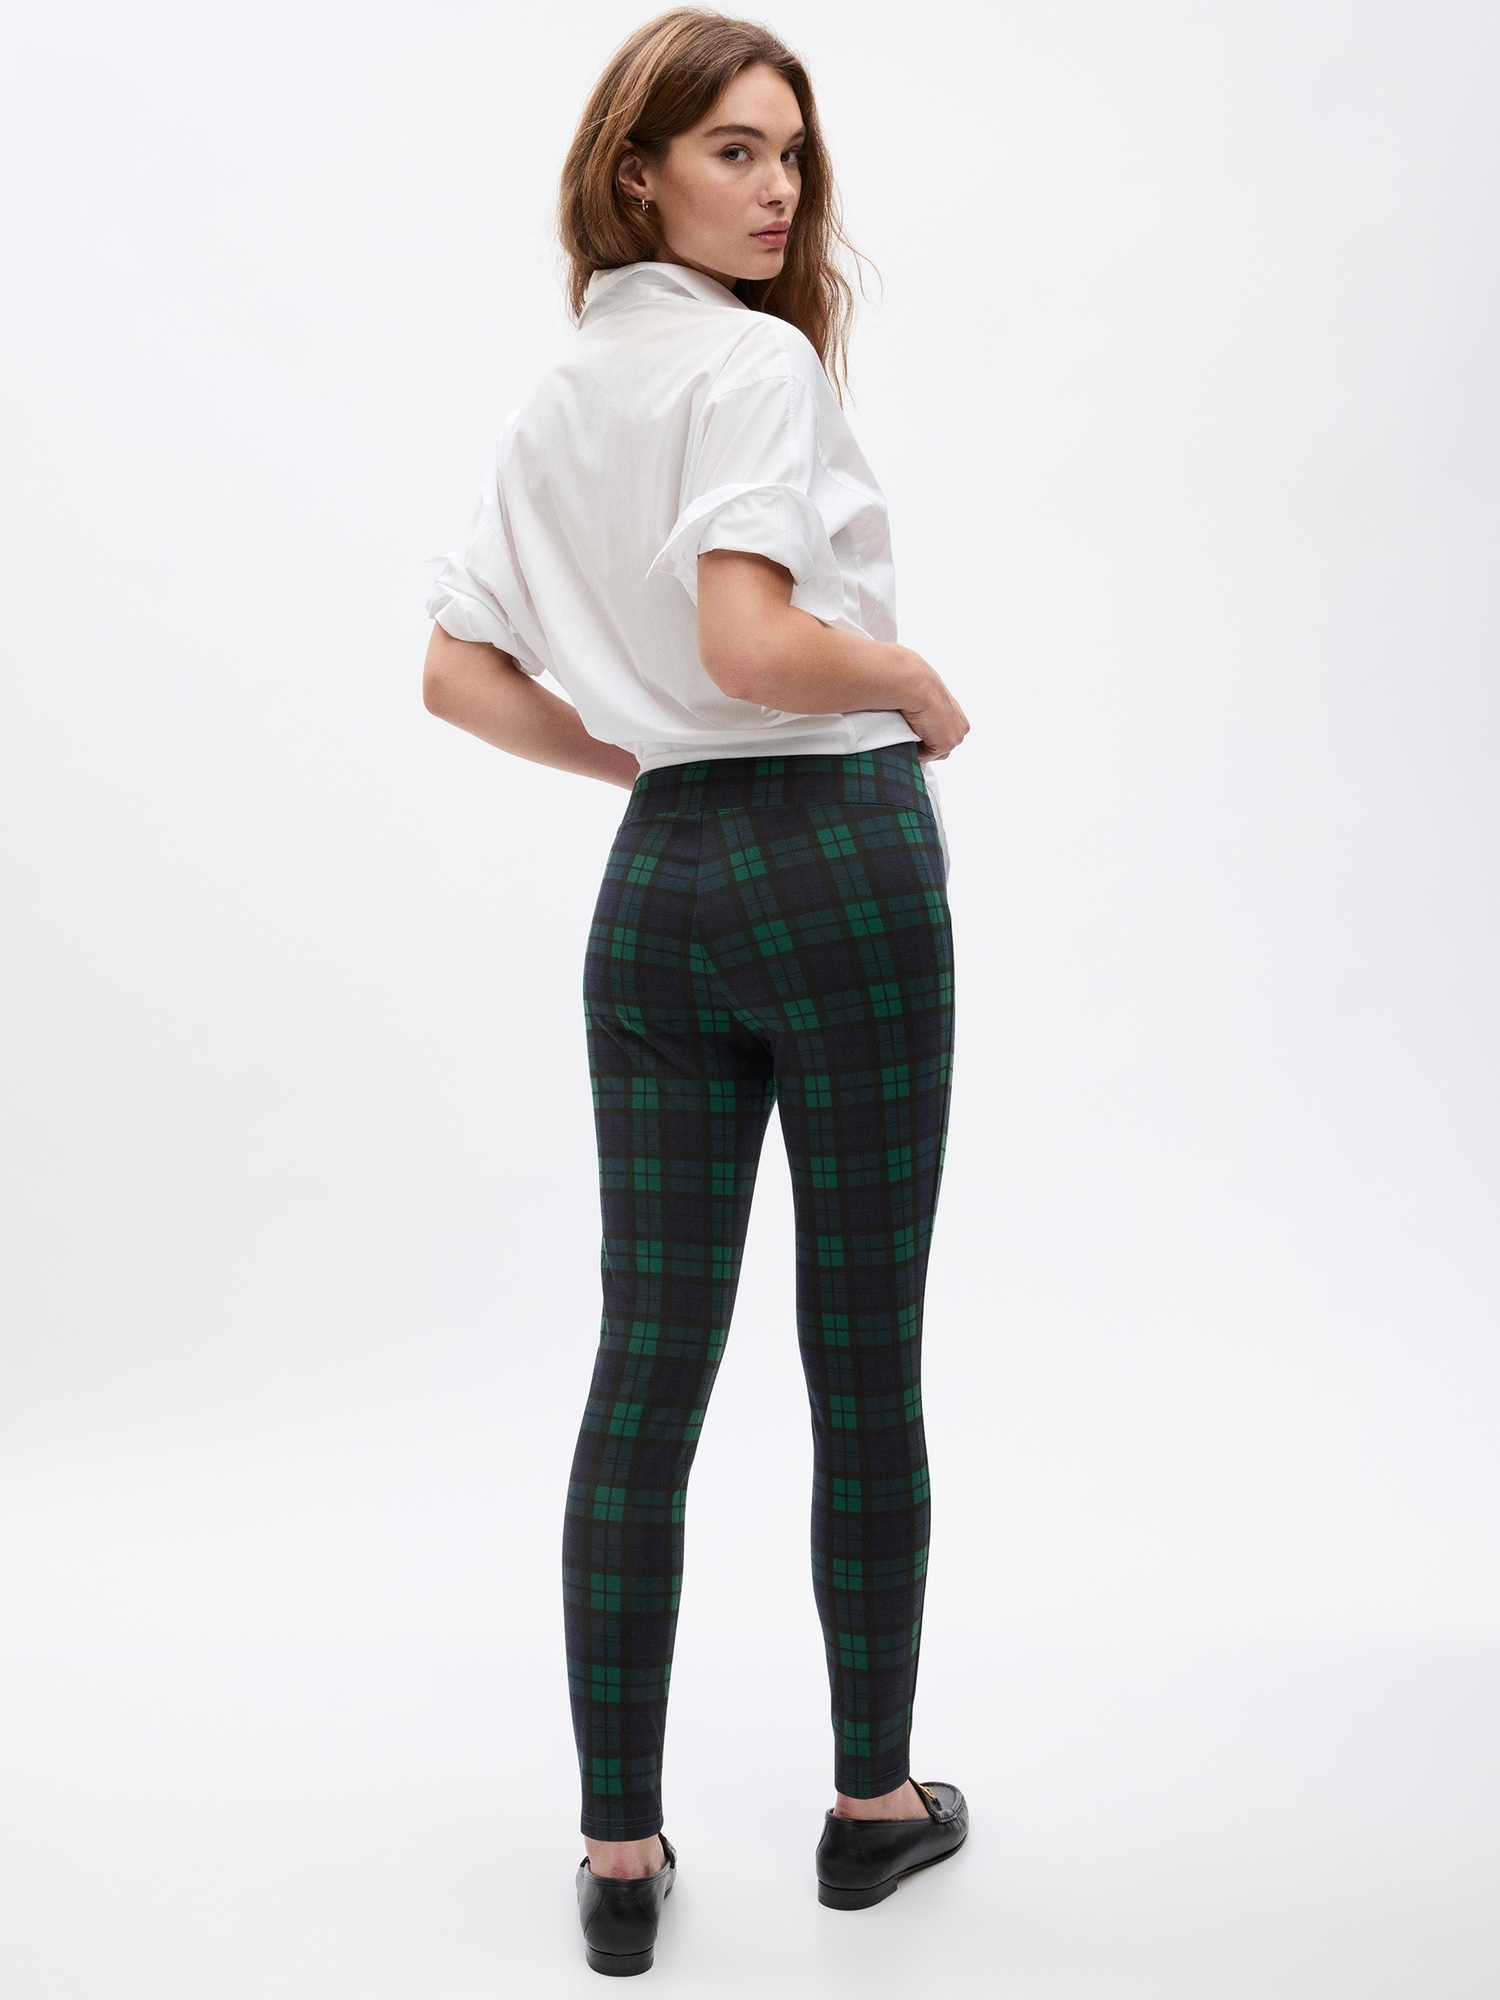 Cheap leggings: 's OnlyPuff leggings on sale for $26 and are